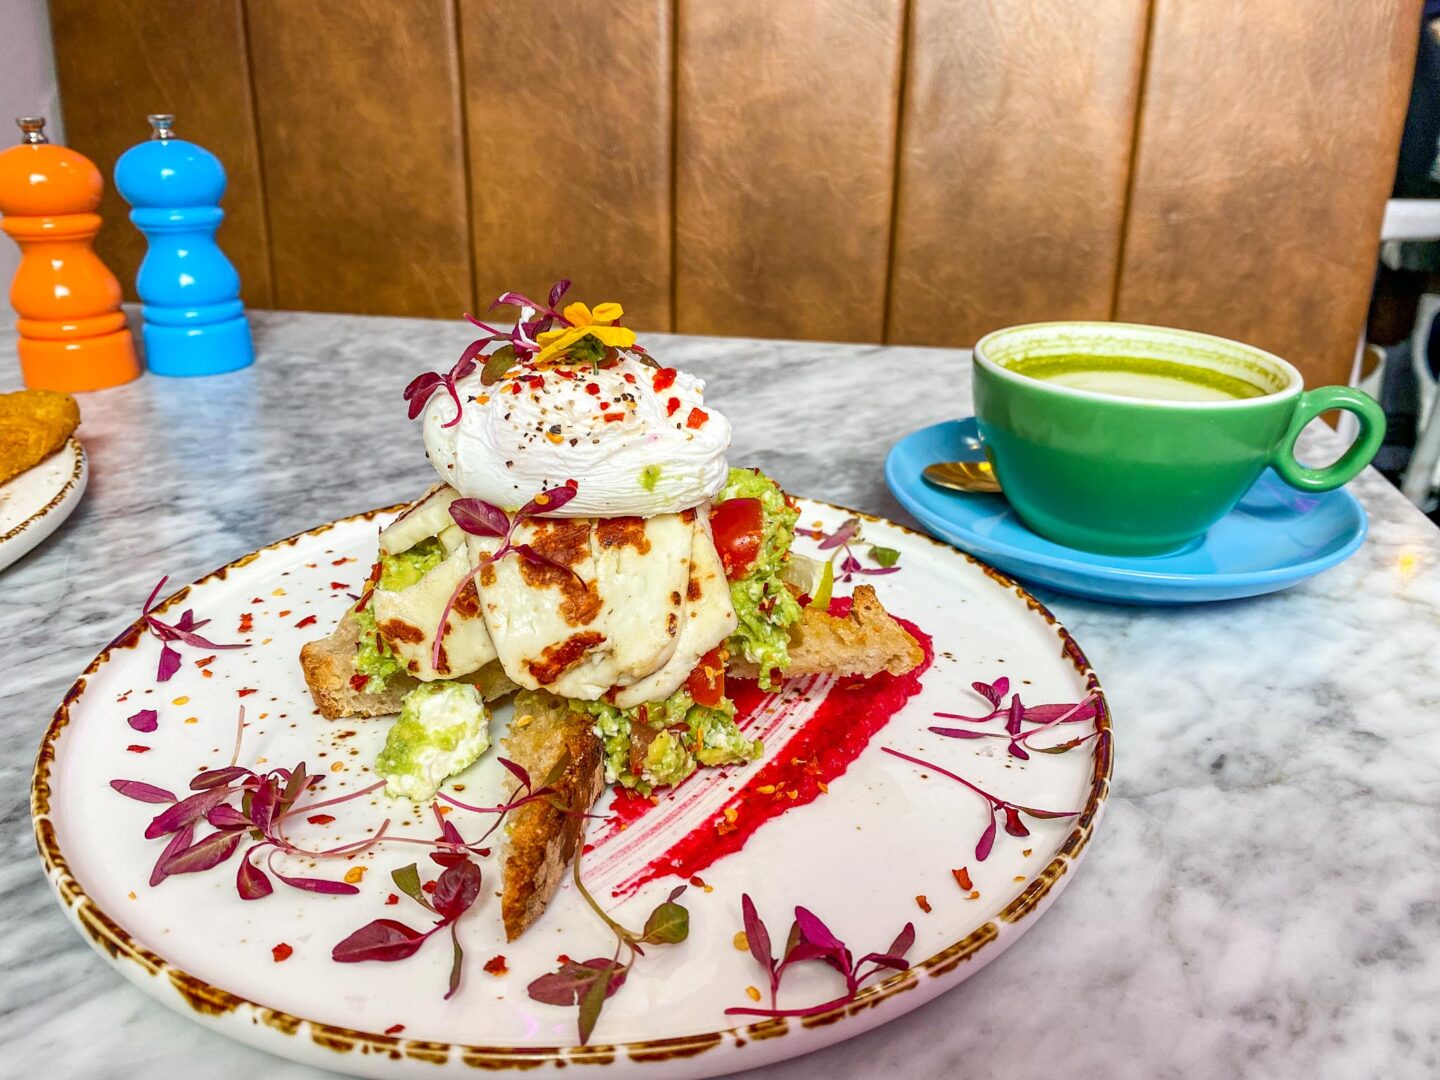 halal restaurants in manchester, Avocado and egg on toast with matcha latte at Caramello of Didsbury, halal brunch manchester